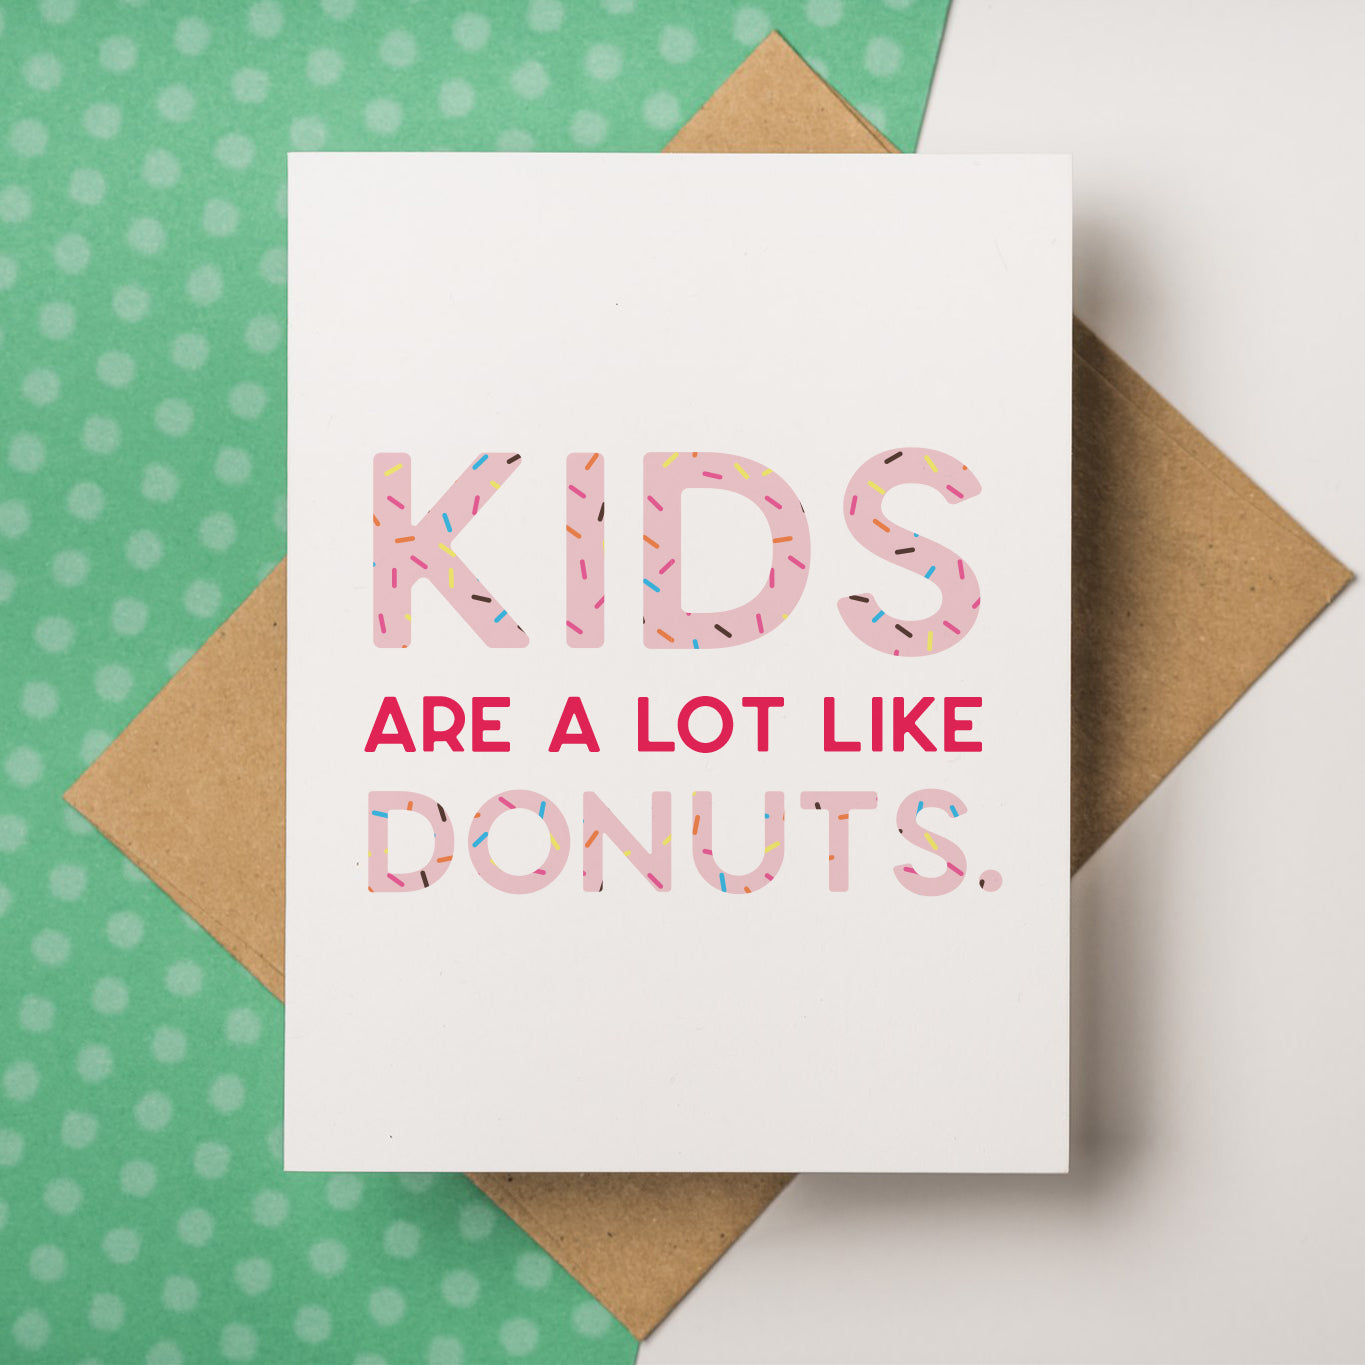 A funny and unique baby and parenthood greeting card that reads "Kids are a lot like donuts." on the front side,